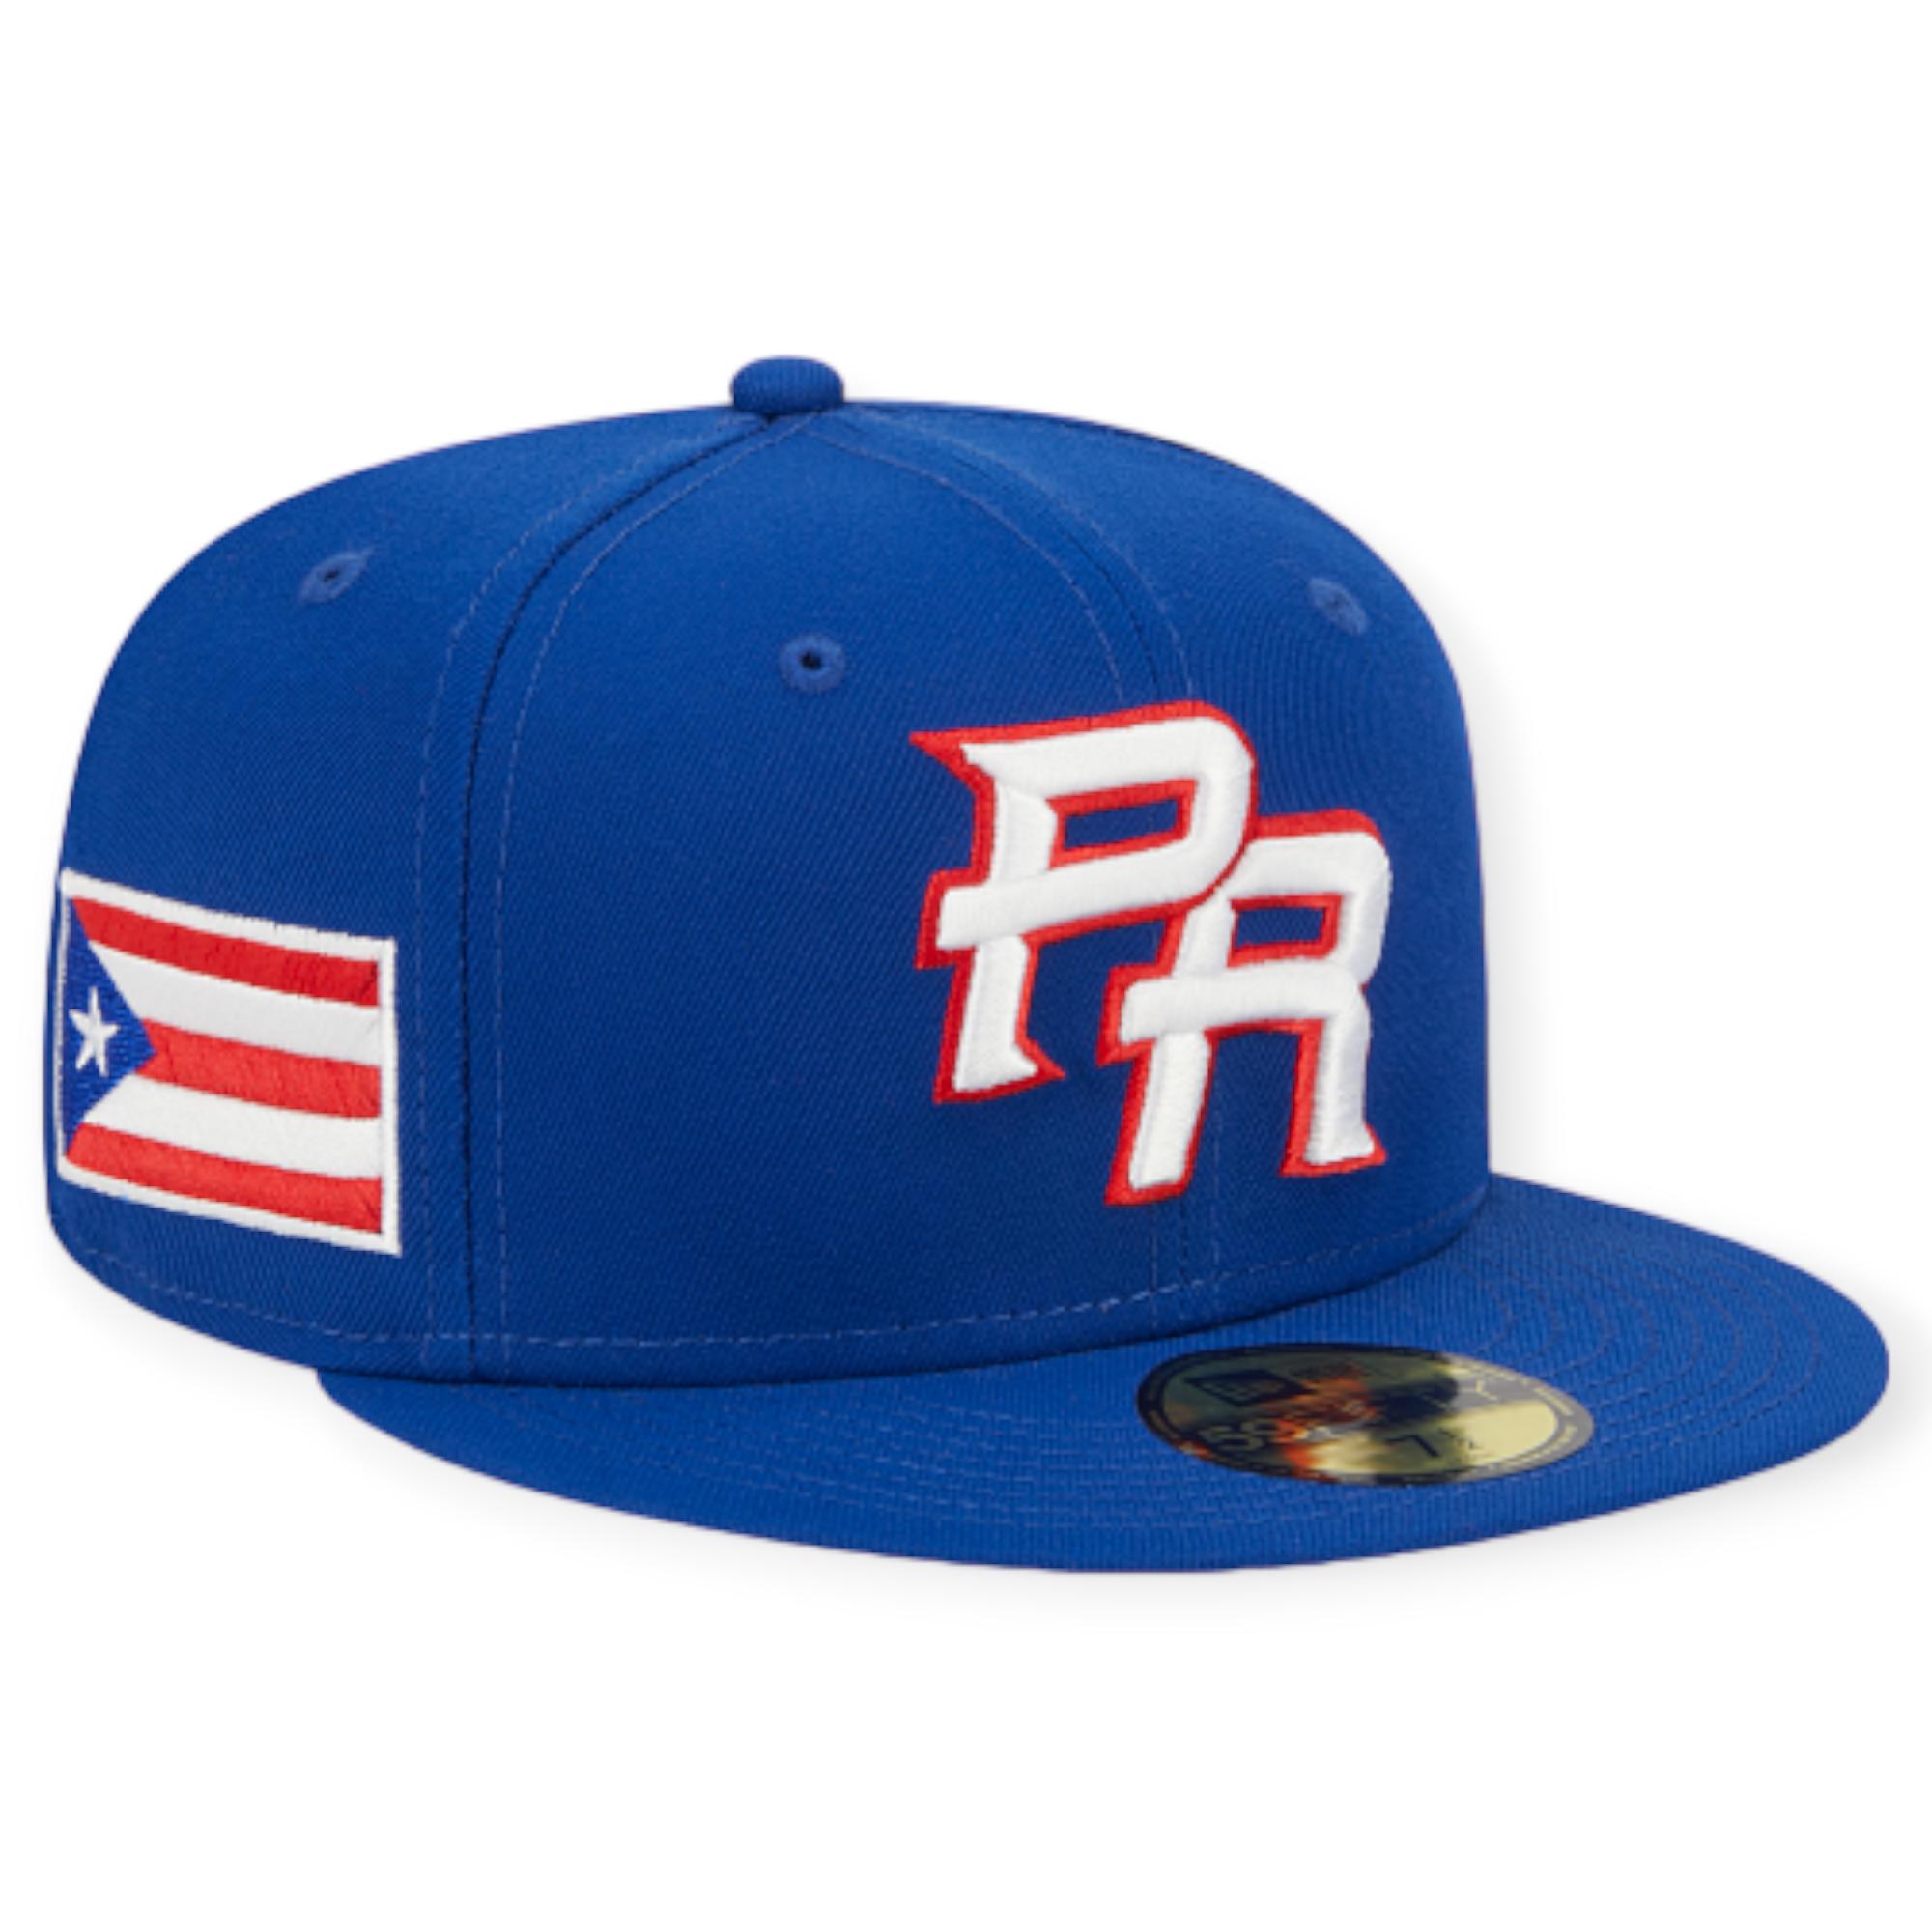 New Era Puerto Rico World Baseball Classic 59FIFTY Fitted Hat (Blue) 1